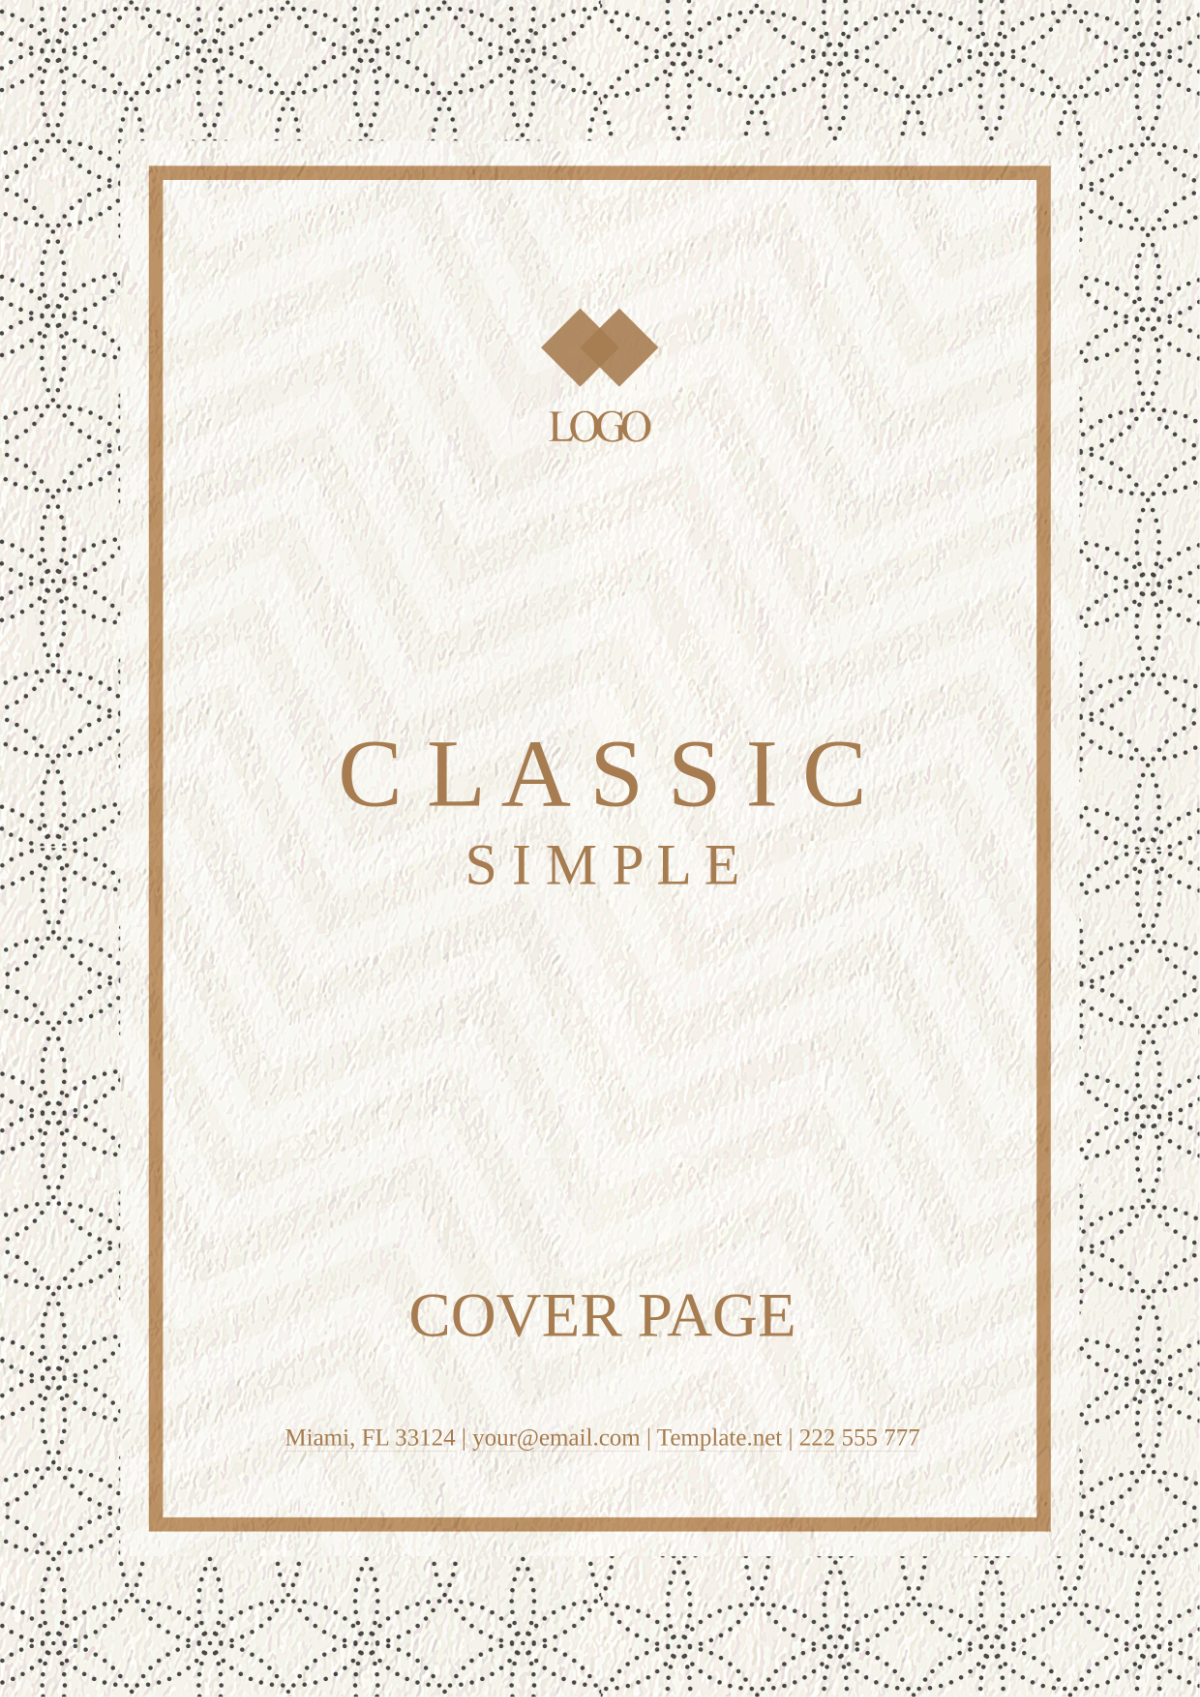 Classic Simple Cover Page Template